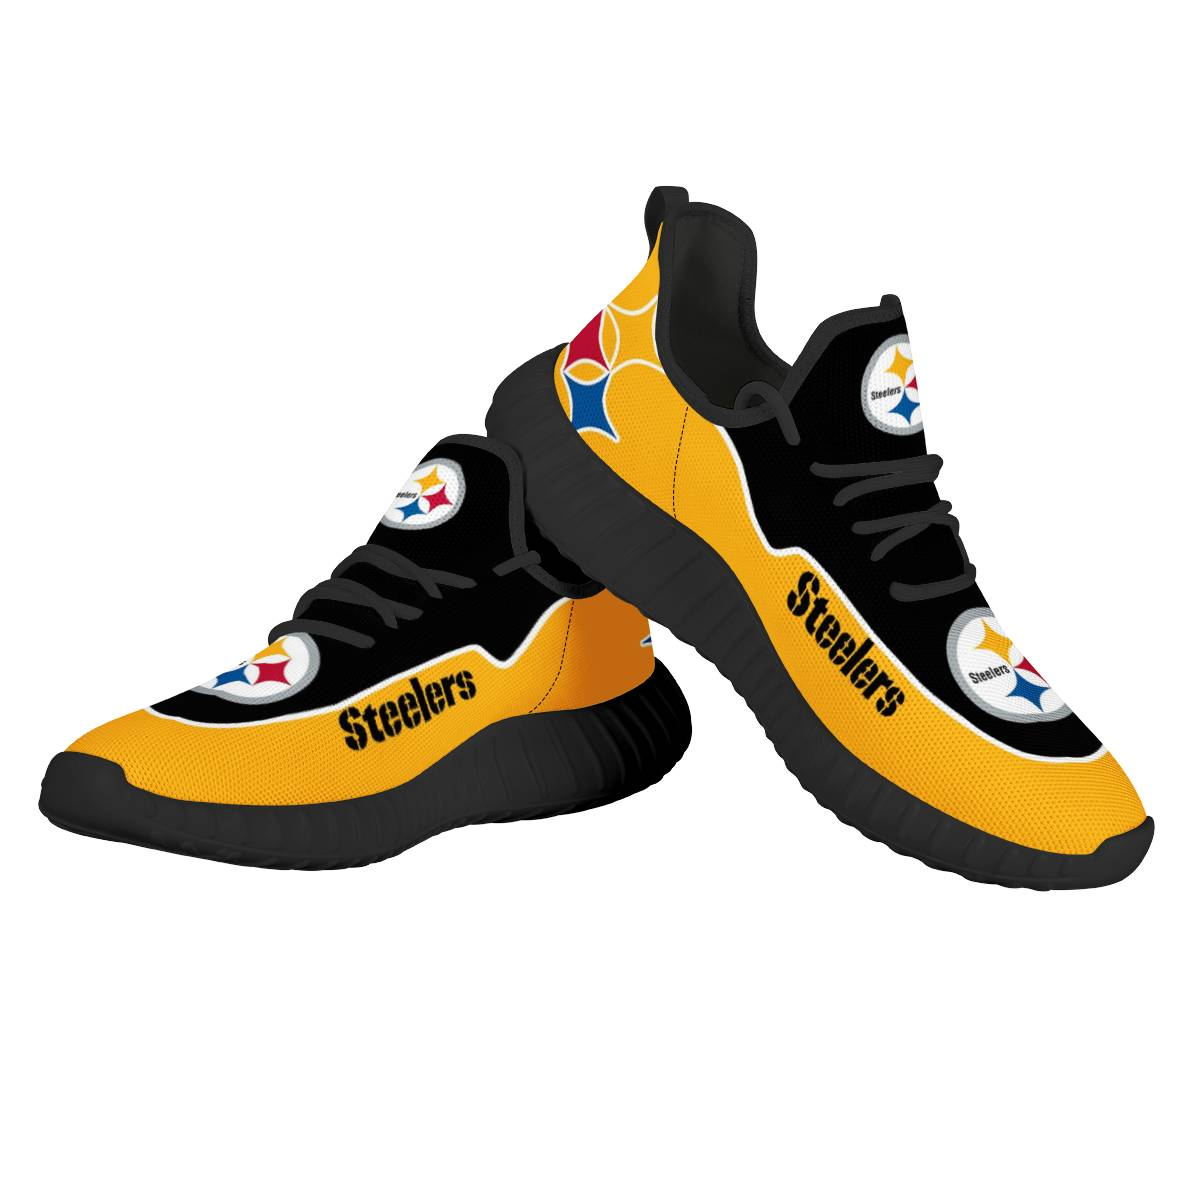 Men's Pittsburgh Steelers Mesh Knit Sneakers/Shoes 007